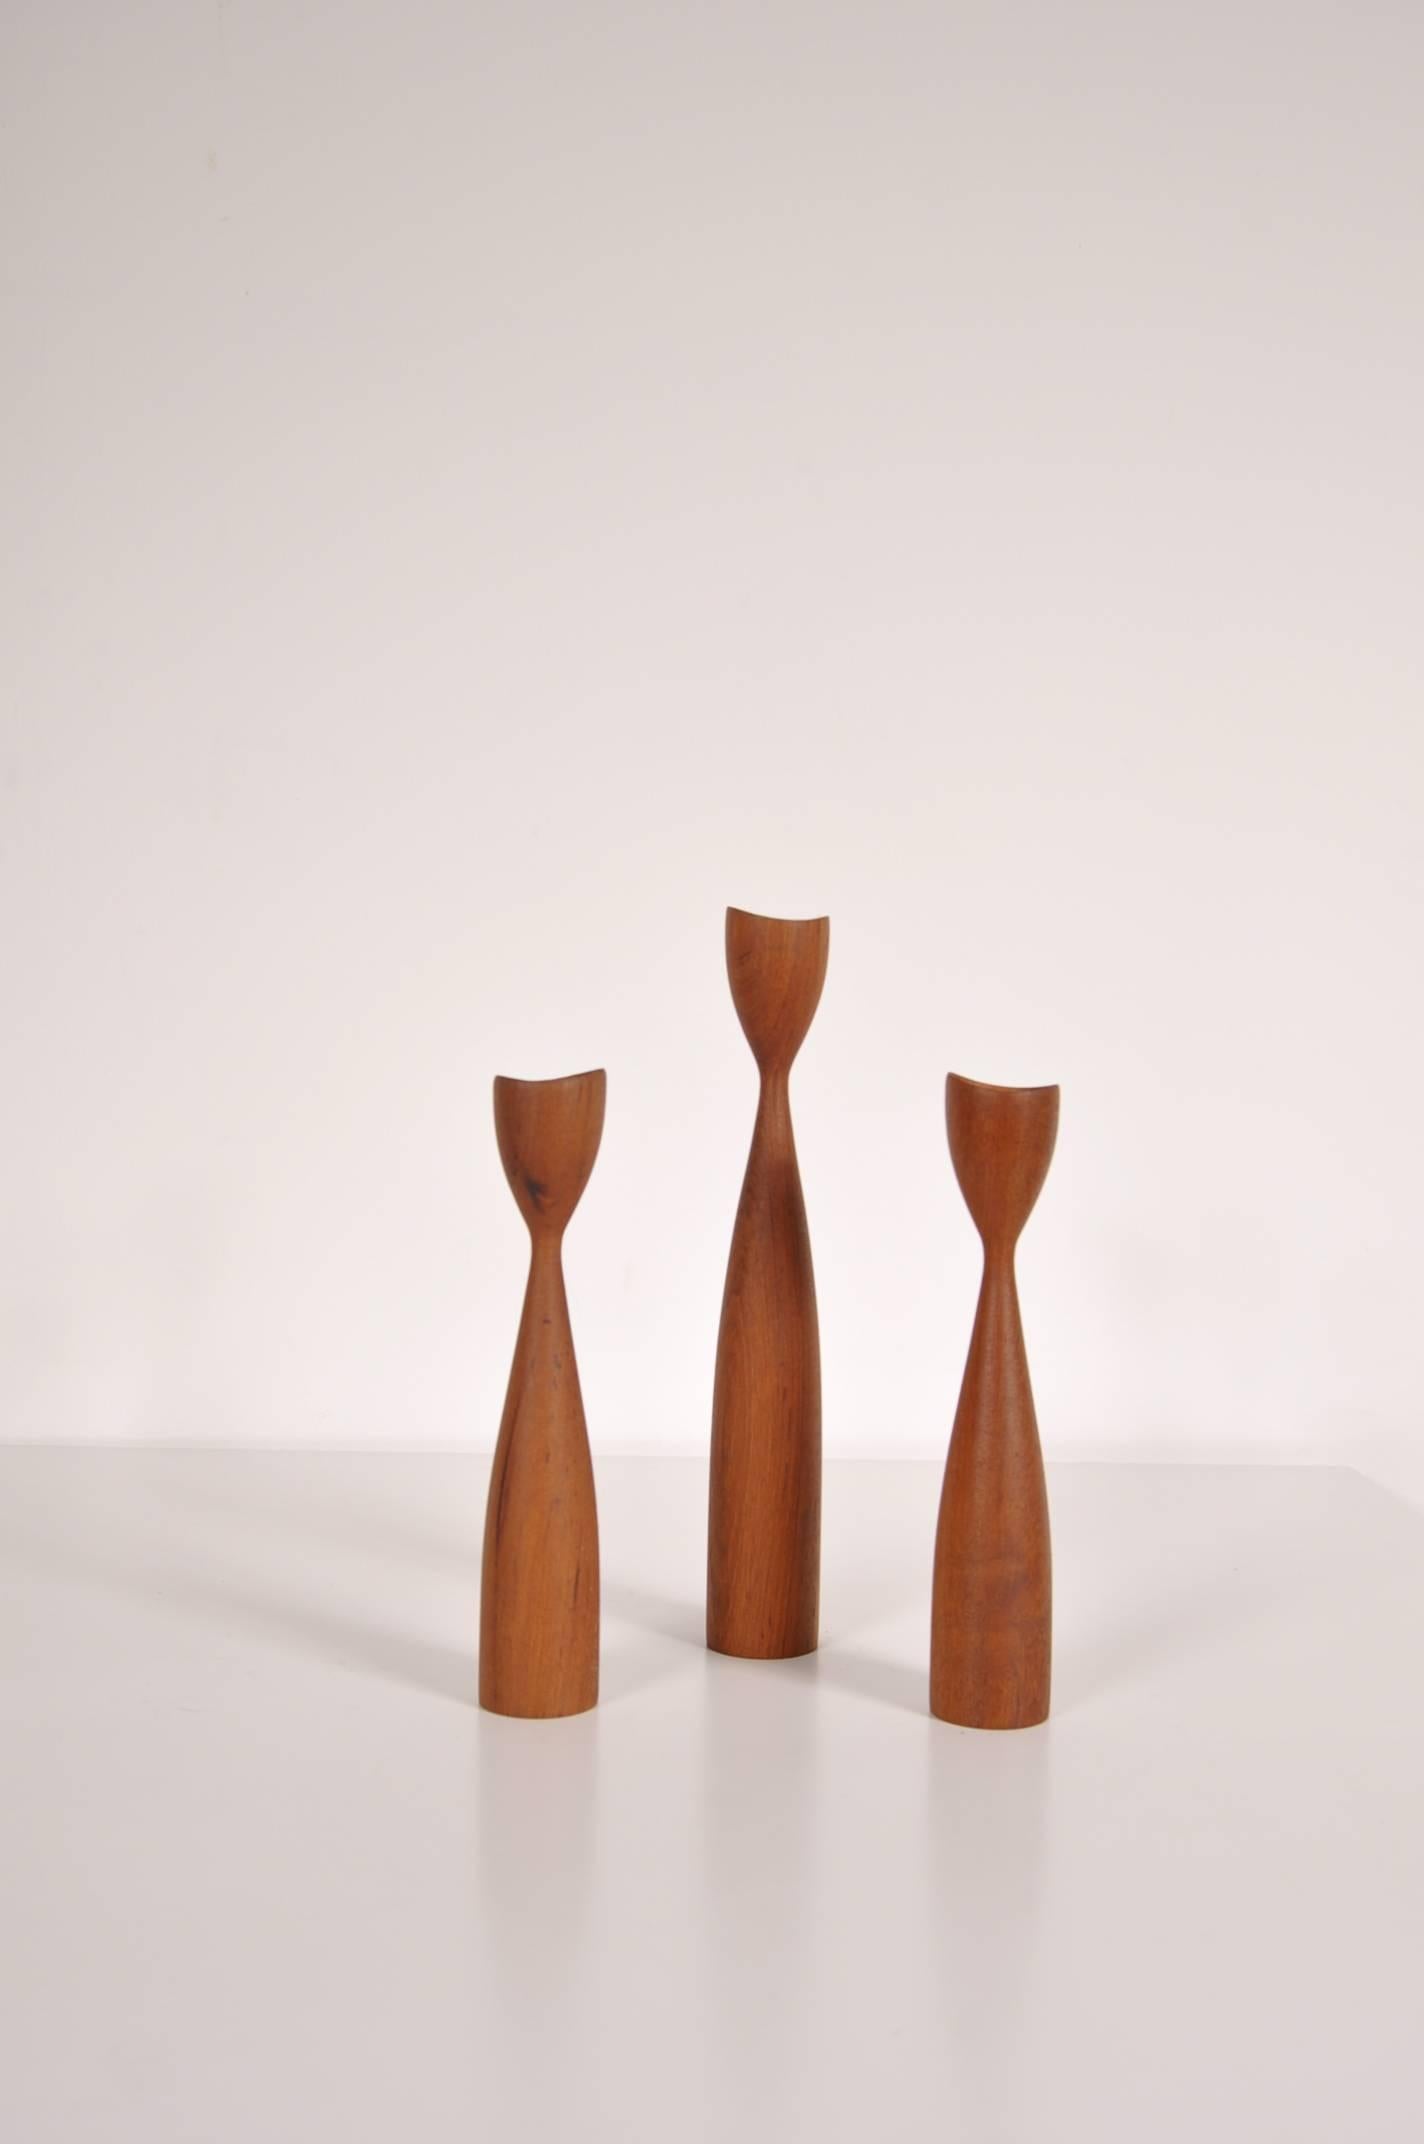 Mid-20th Century Set of Three Candle Holders in the Style of Rude Osolnik, Denmark, circa 1950